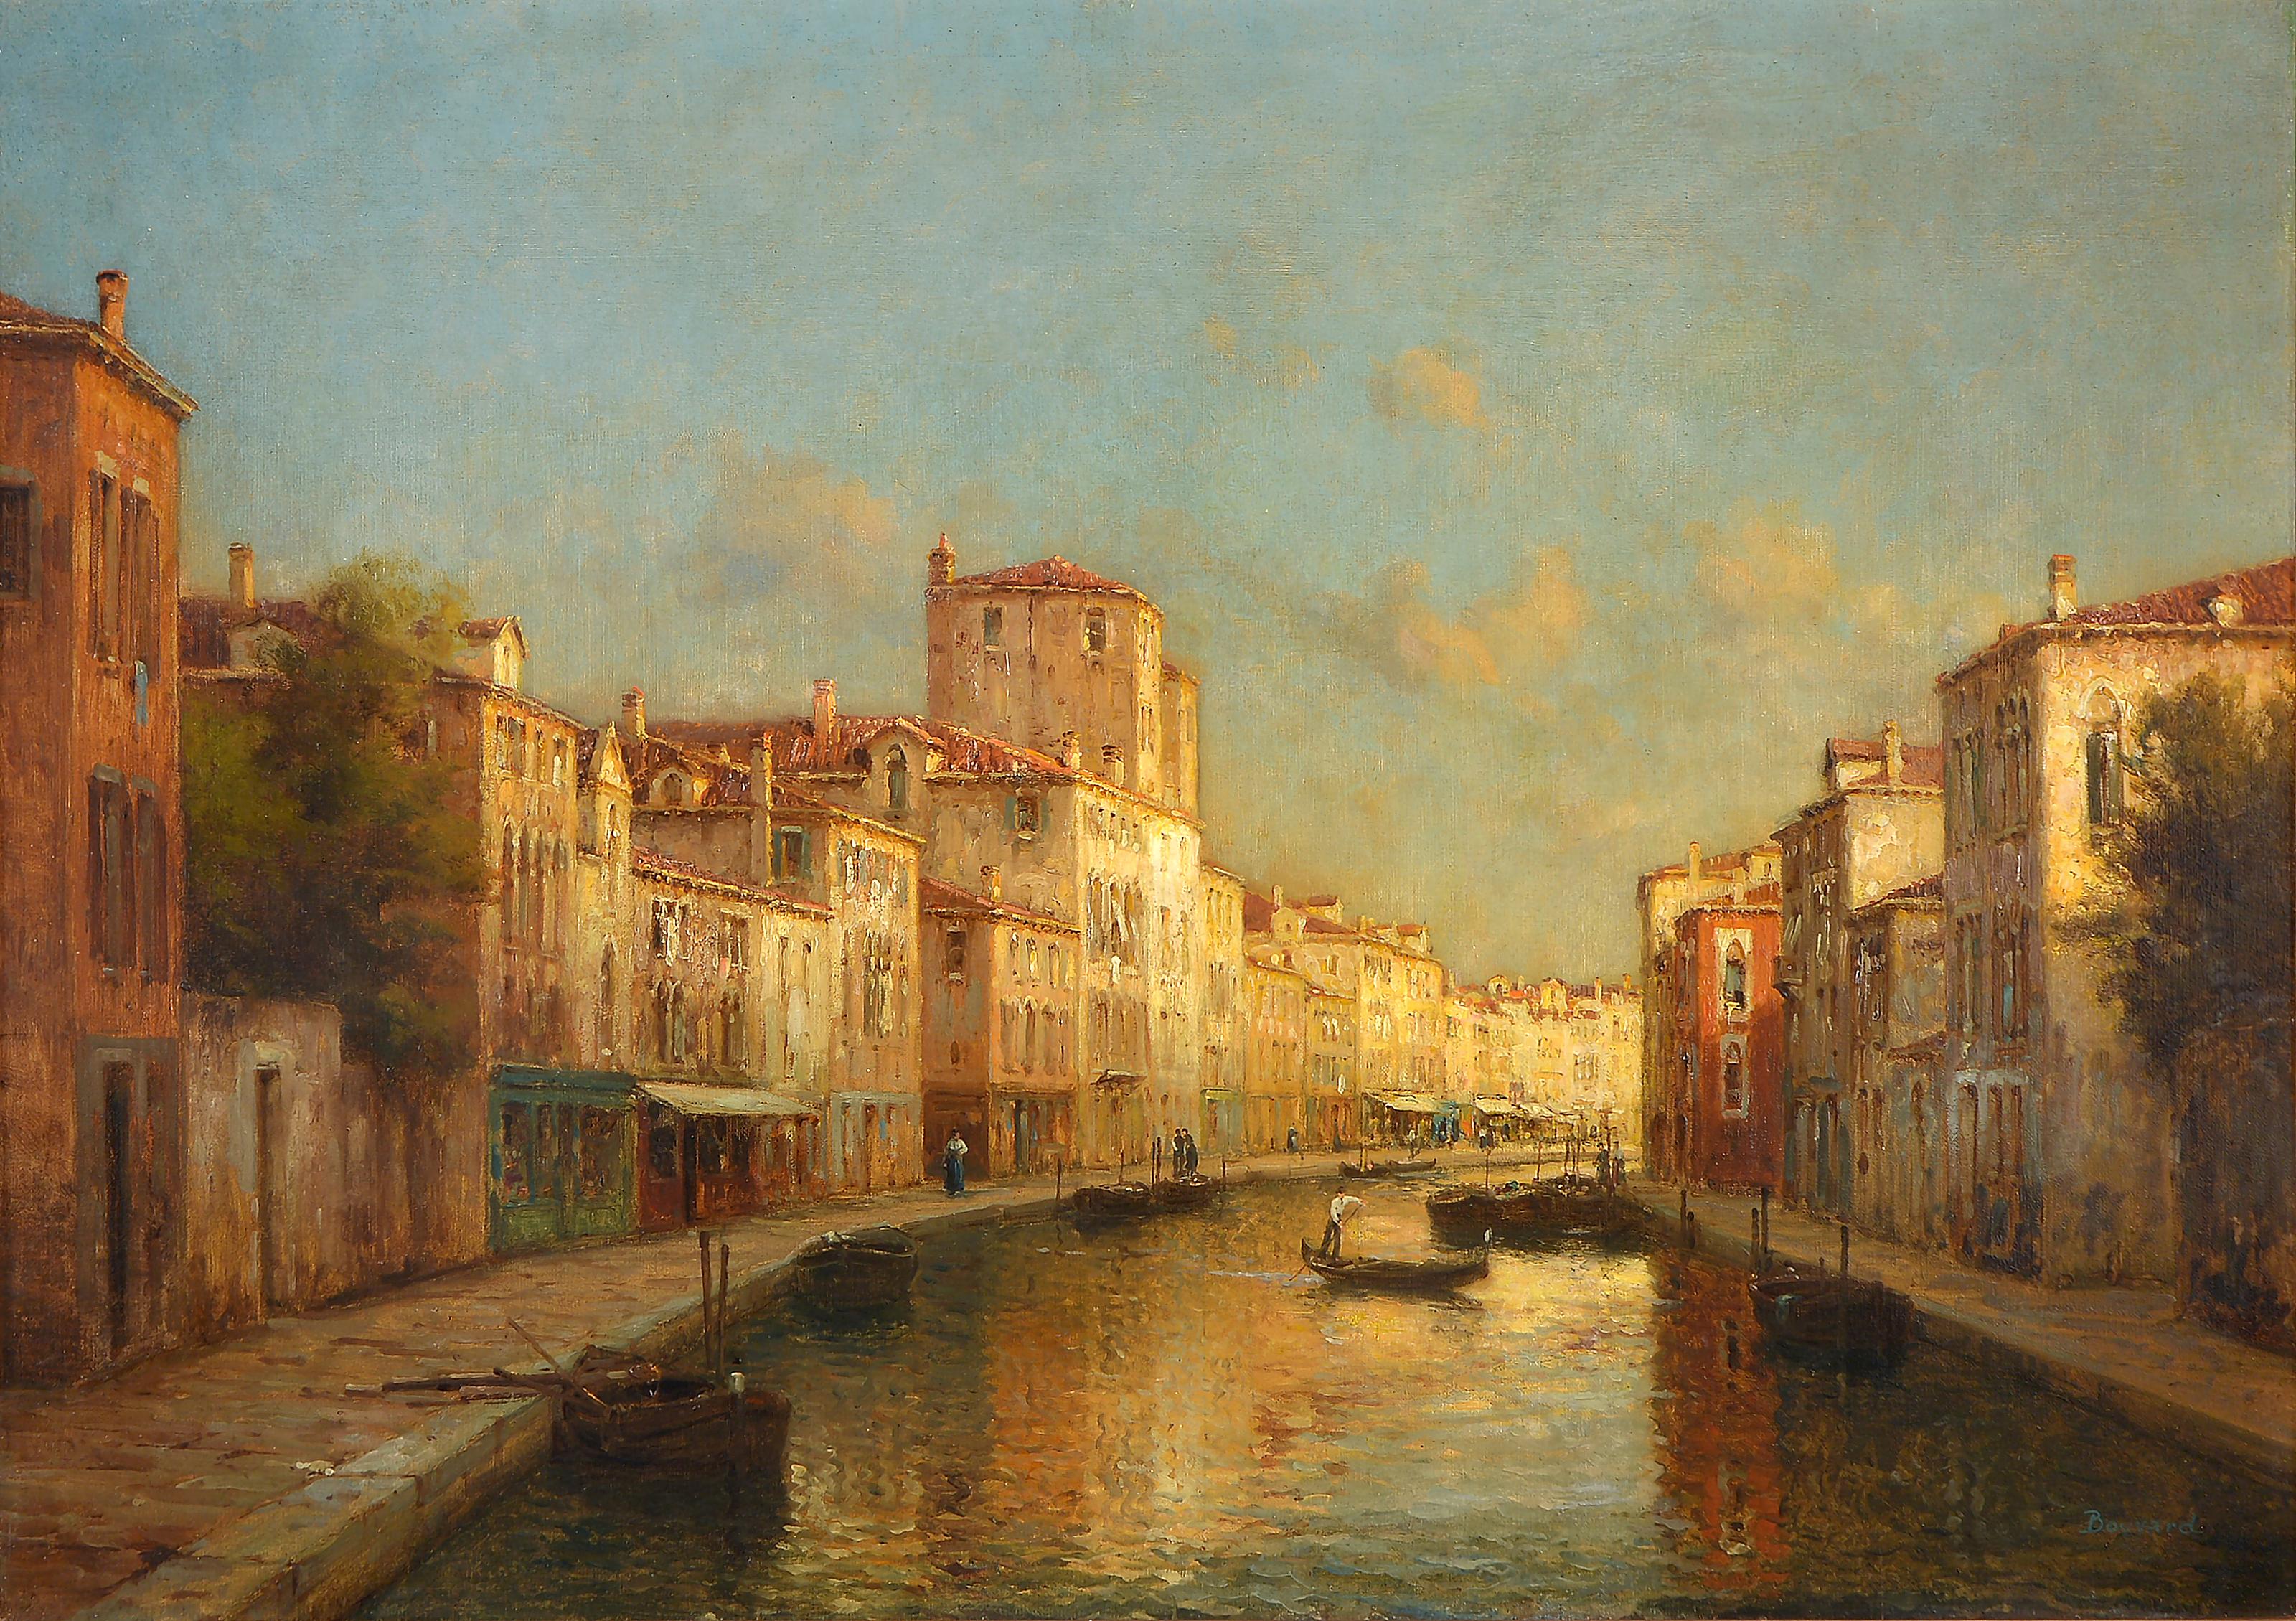 Antoine Bouvard is renowned for his captivating depictions of Venetian canal scenes. His works, characterized by warm tones and a gentle, hazy light typical of sunset settings, have left an enduring impact. One of his notable pieces, 